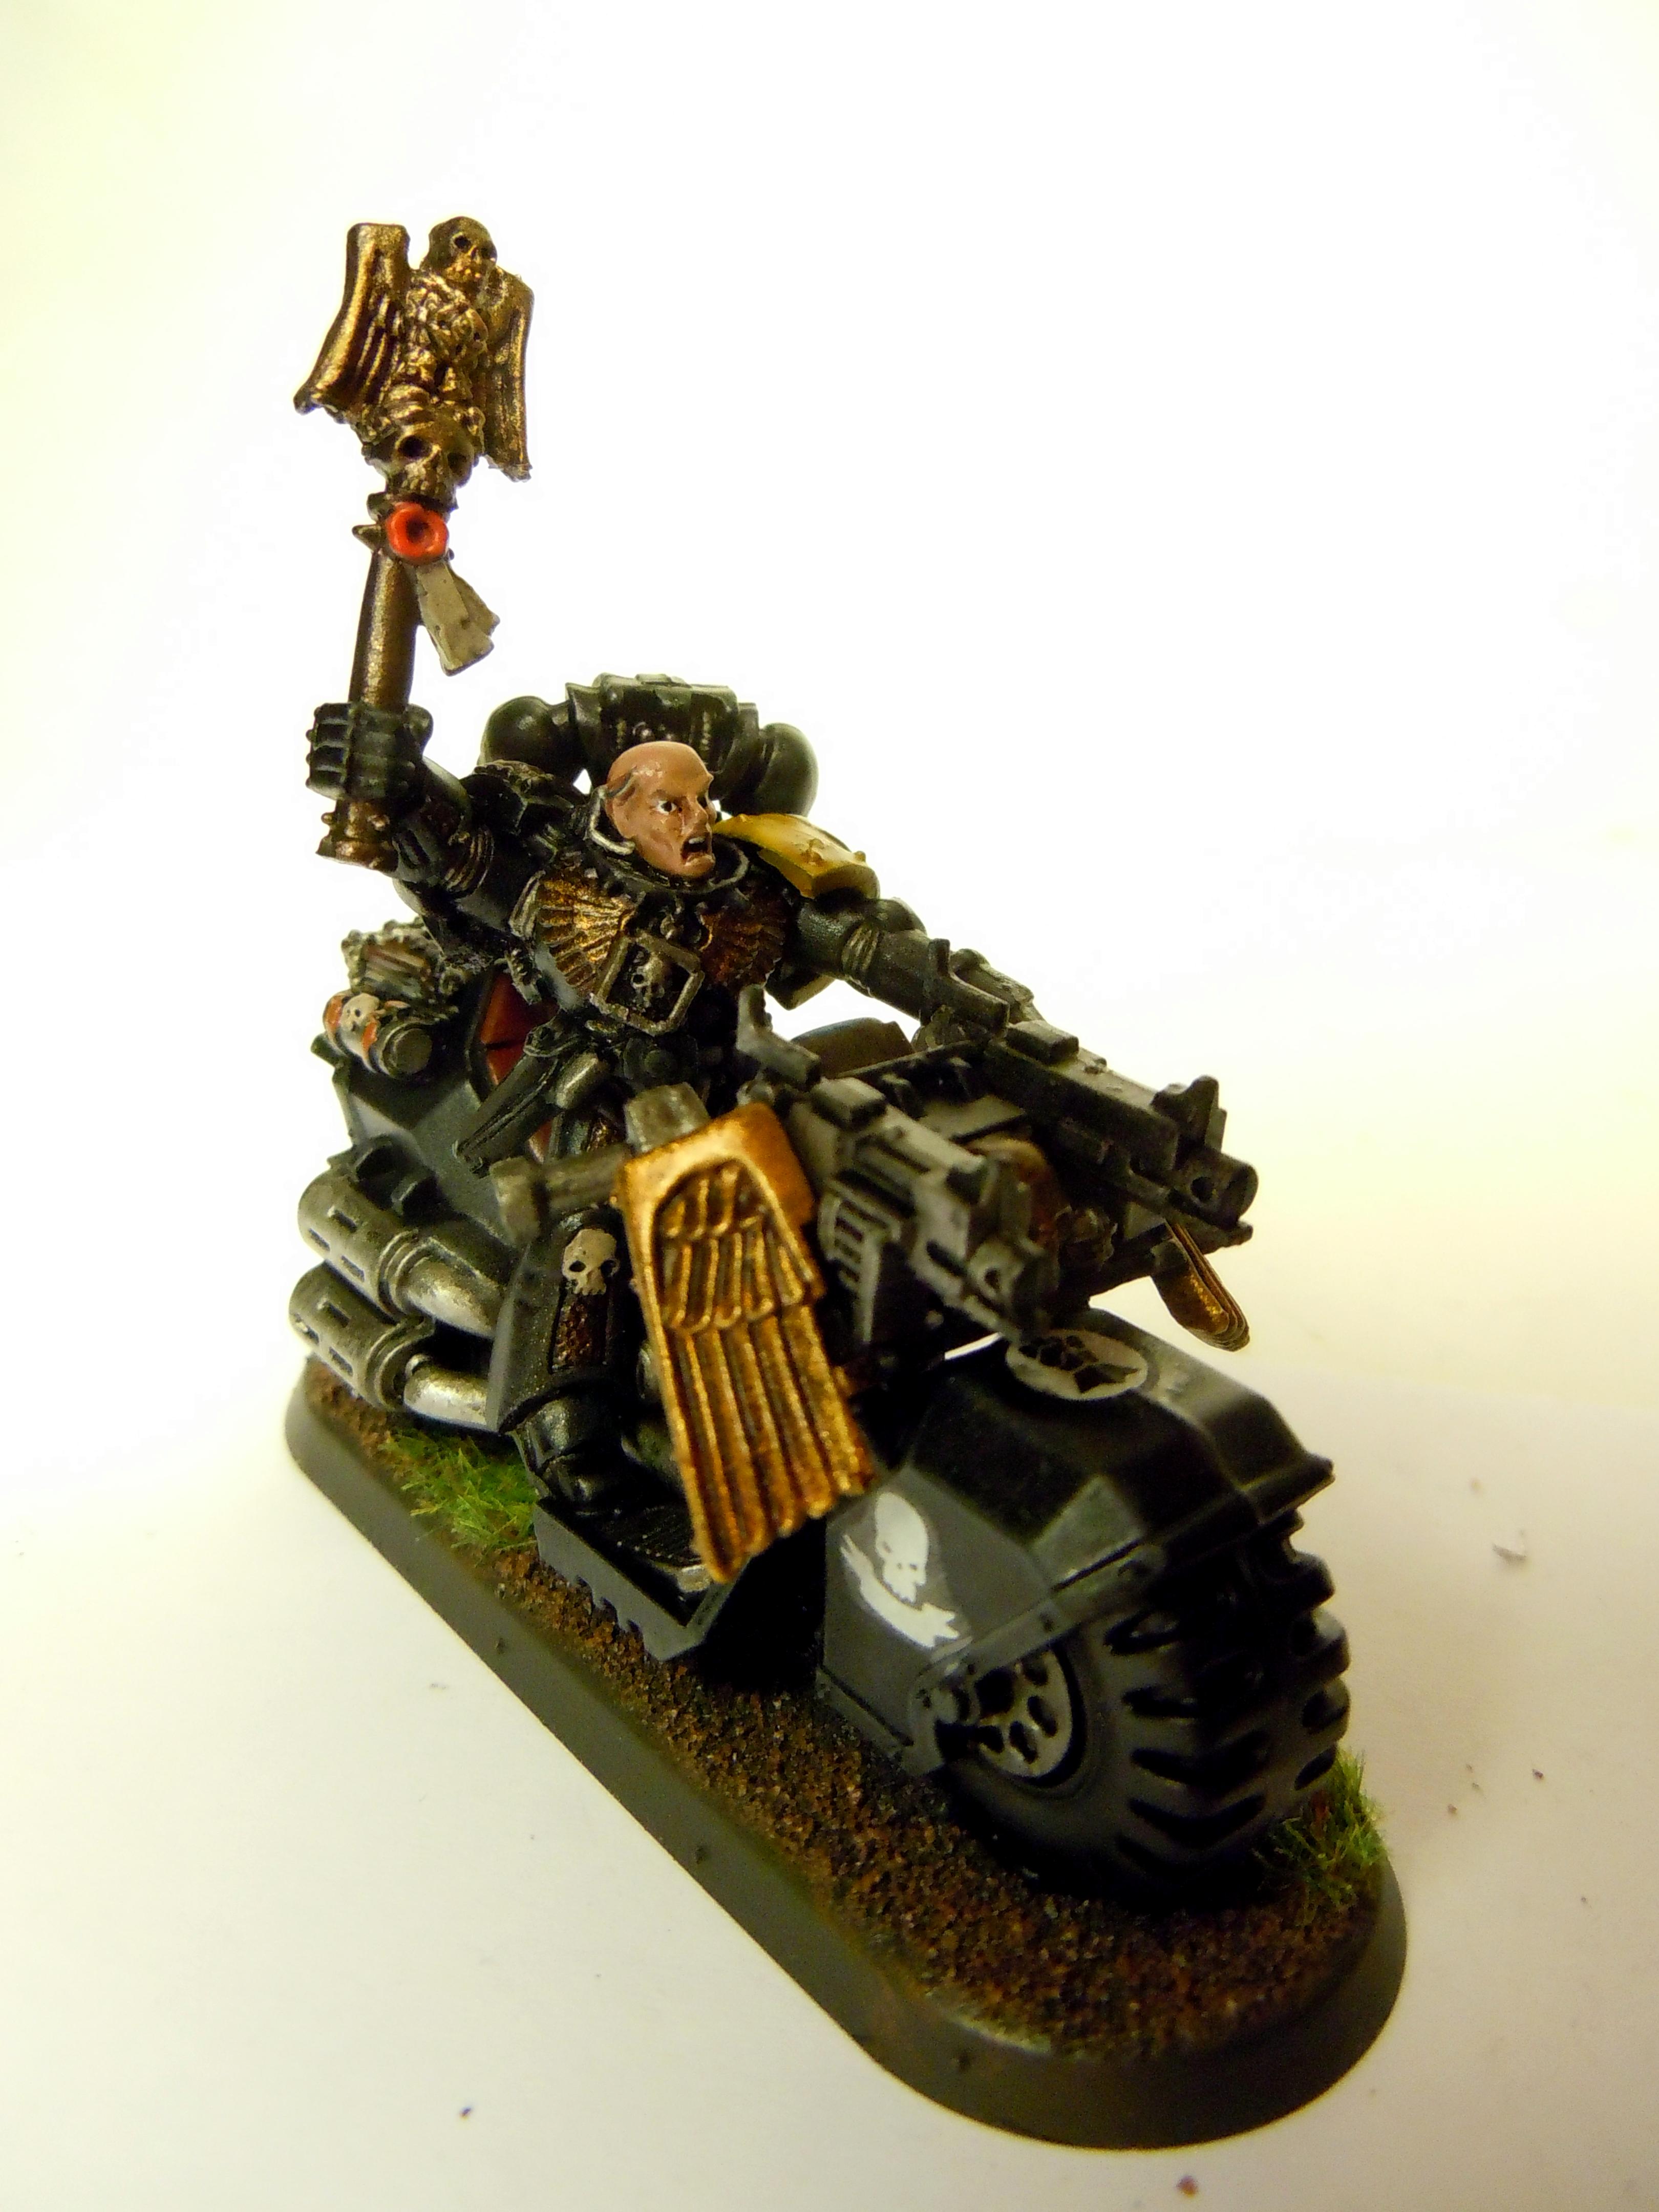 Bike, Chaplain, Imperial Fists, Space Marines